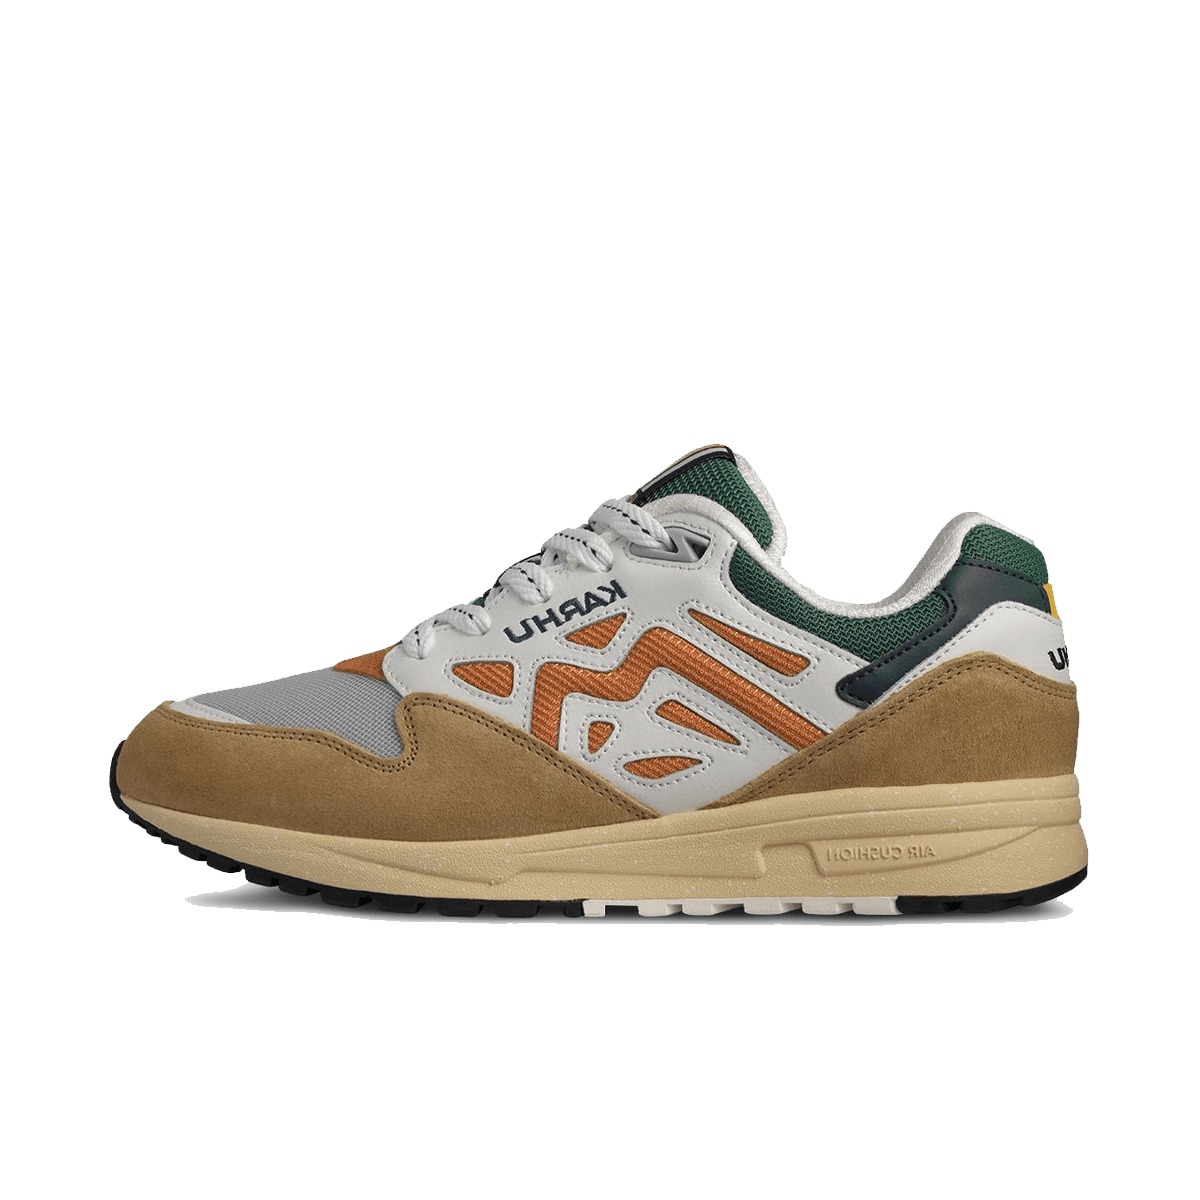 Karhu Legacy 96 'Curry' - The Forest Rules Pack